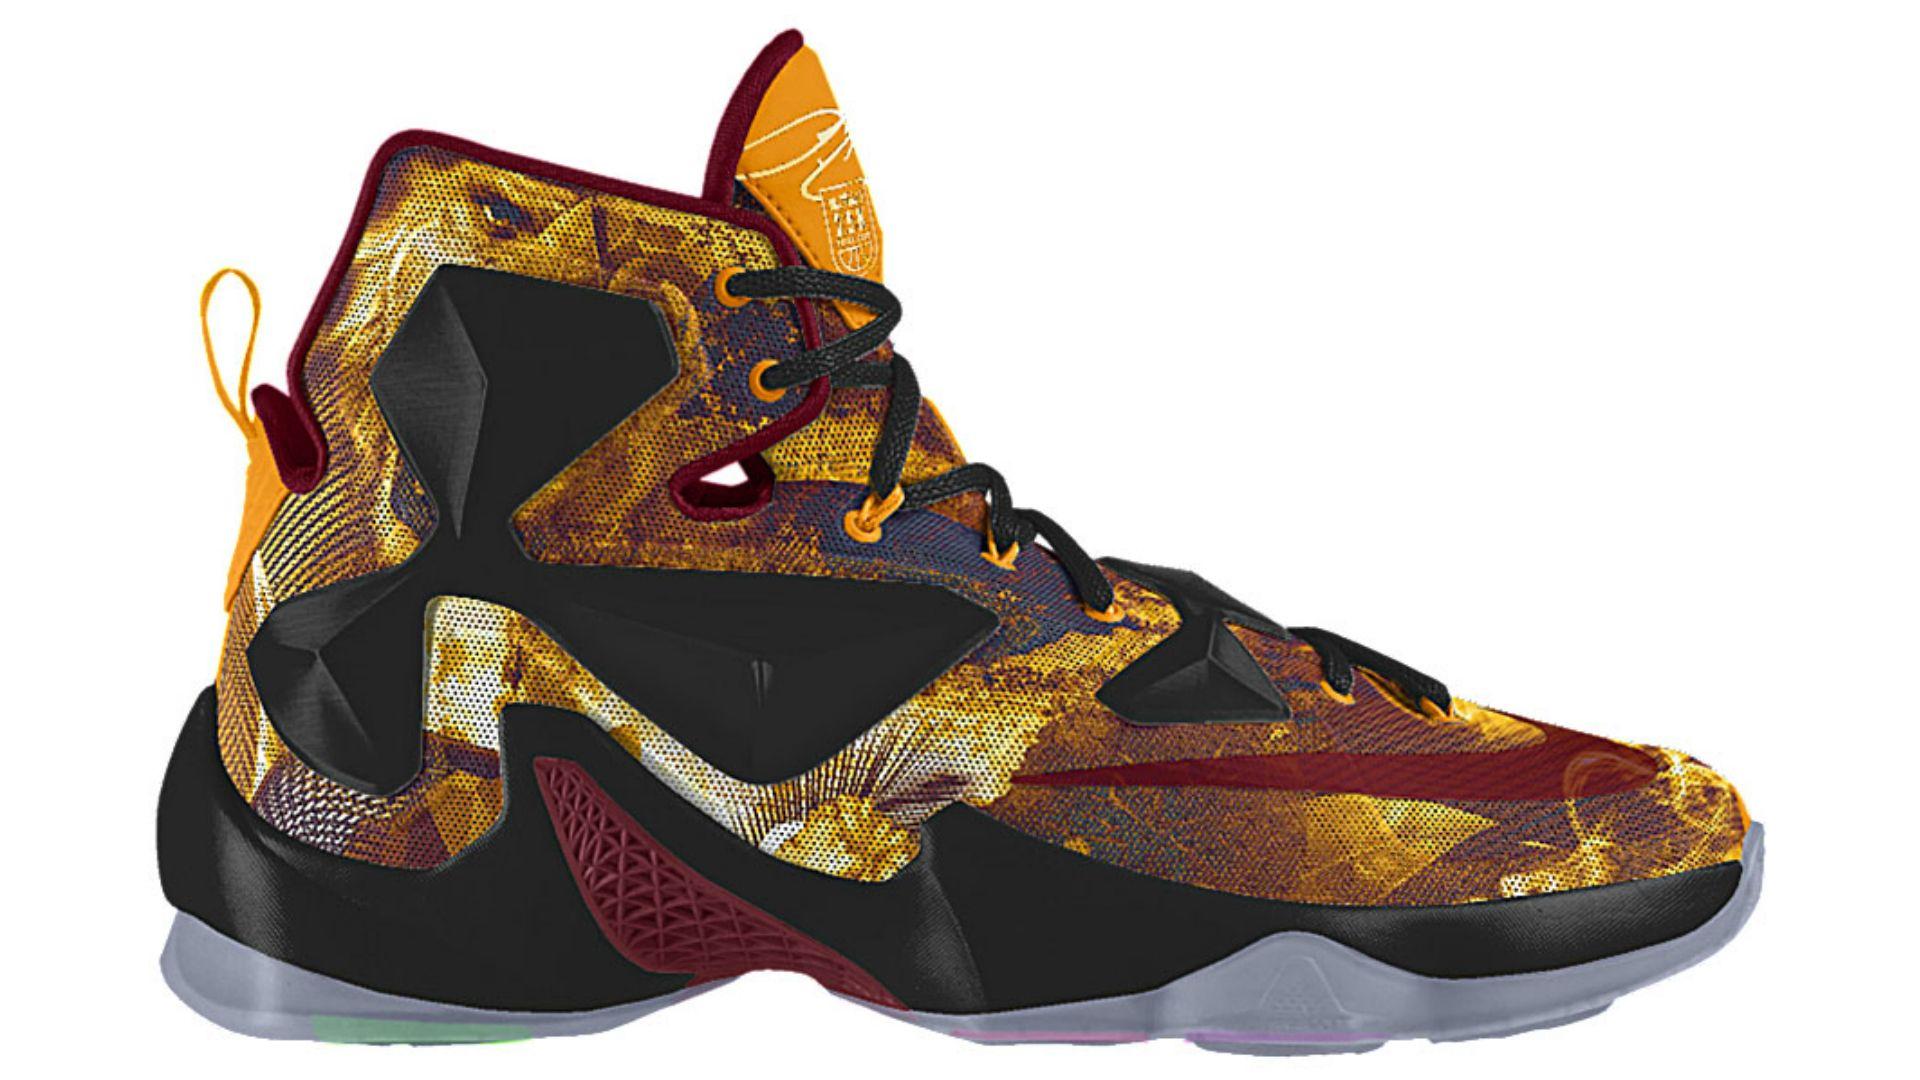 LeBron James Gets A Limited Edition Shoe For His 000th NBA Point